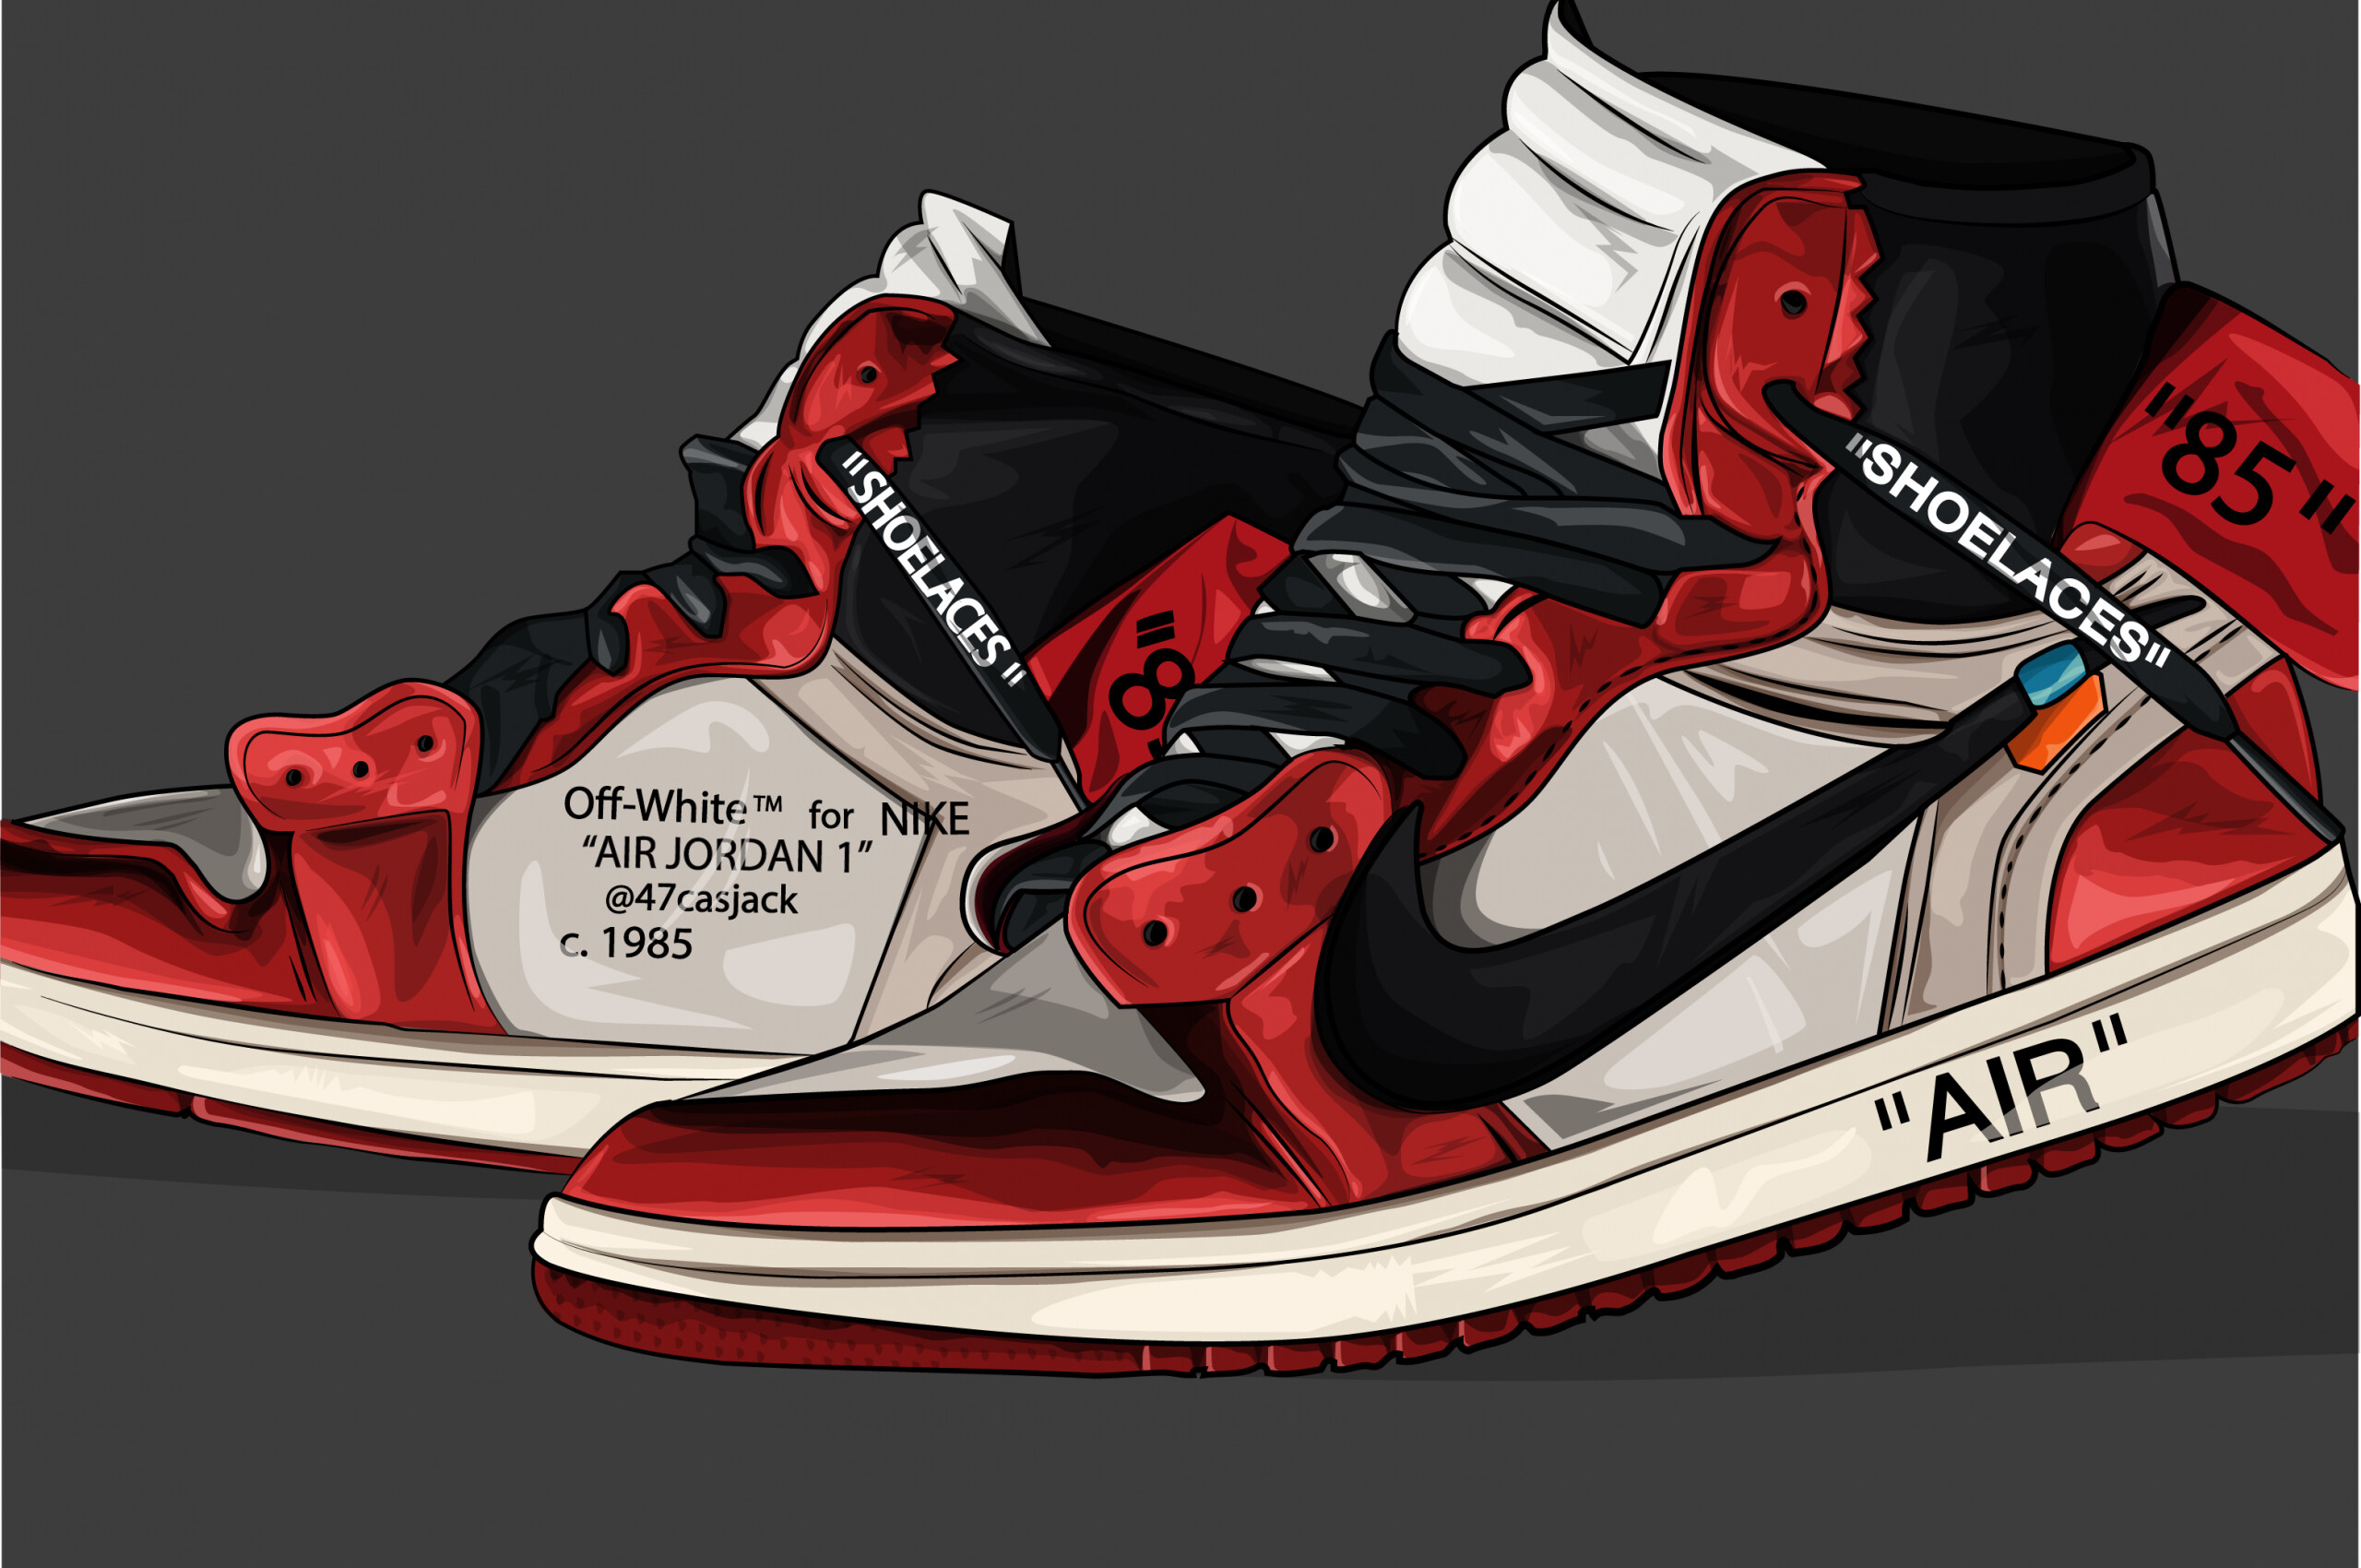 Off-White: Milan-based fashion brand, Collaboration with Air Jordan. 2560x1700 HD Background.